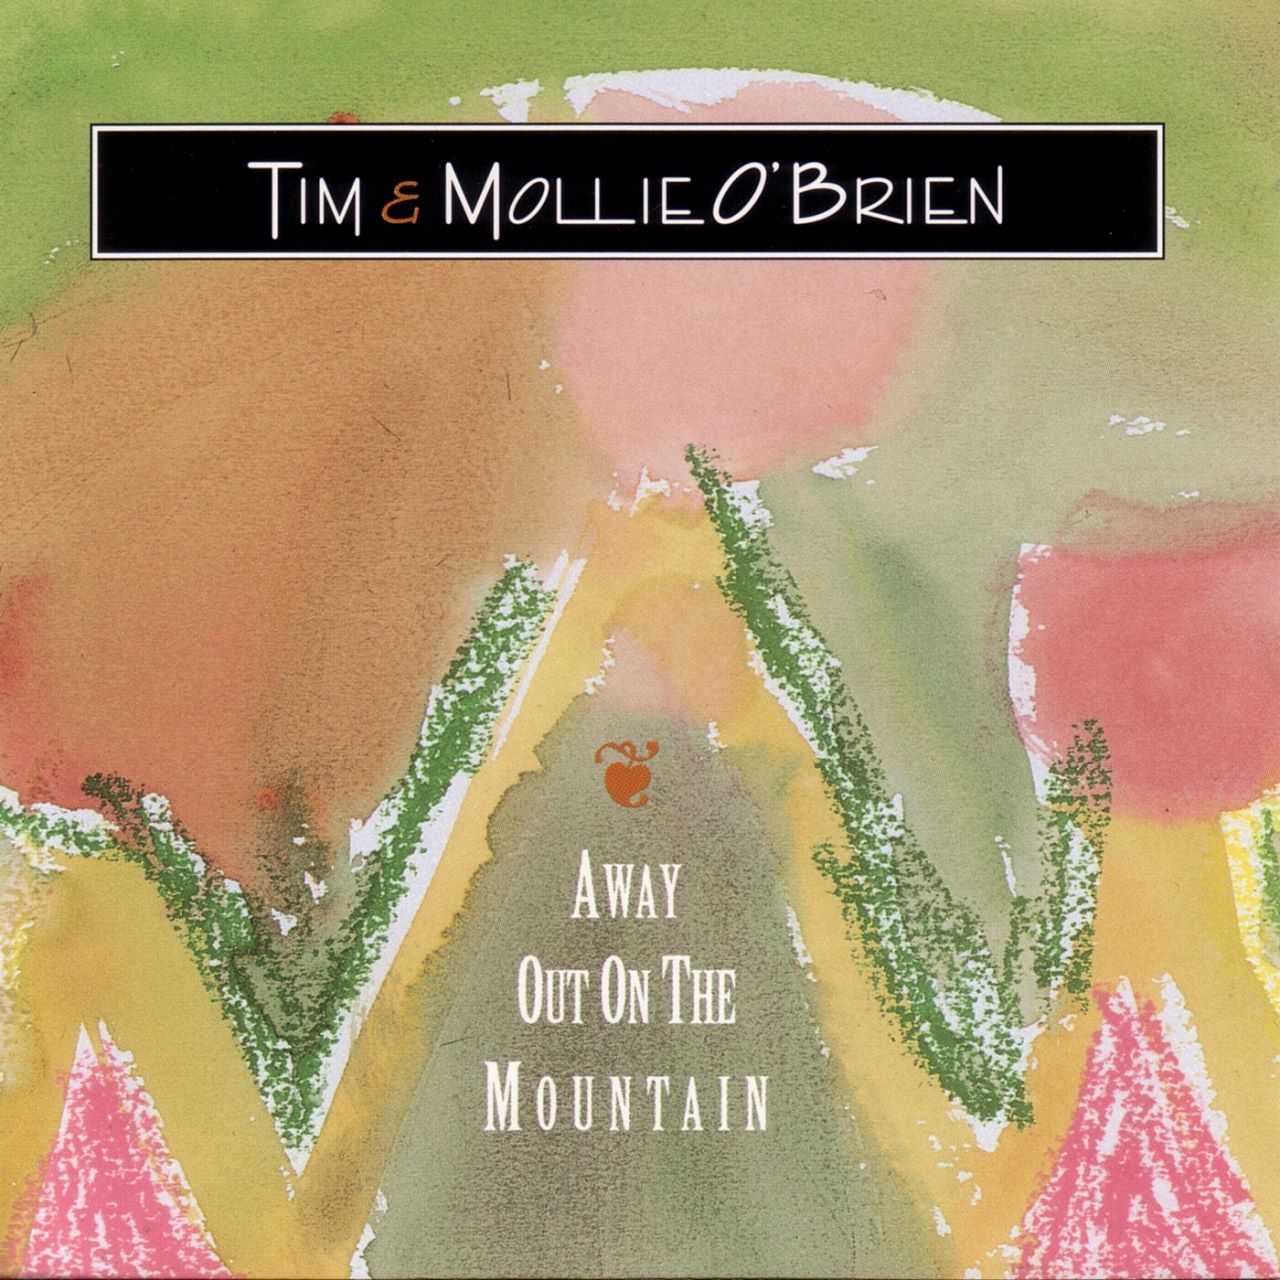 Tim & Mollie O'Brien - Away Out On the Mountain cover album